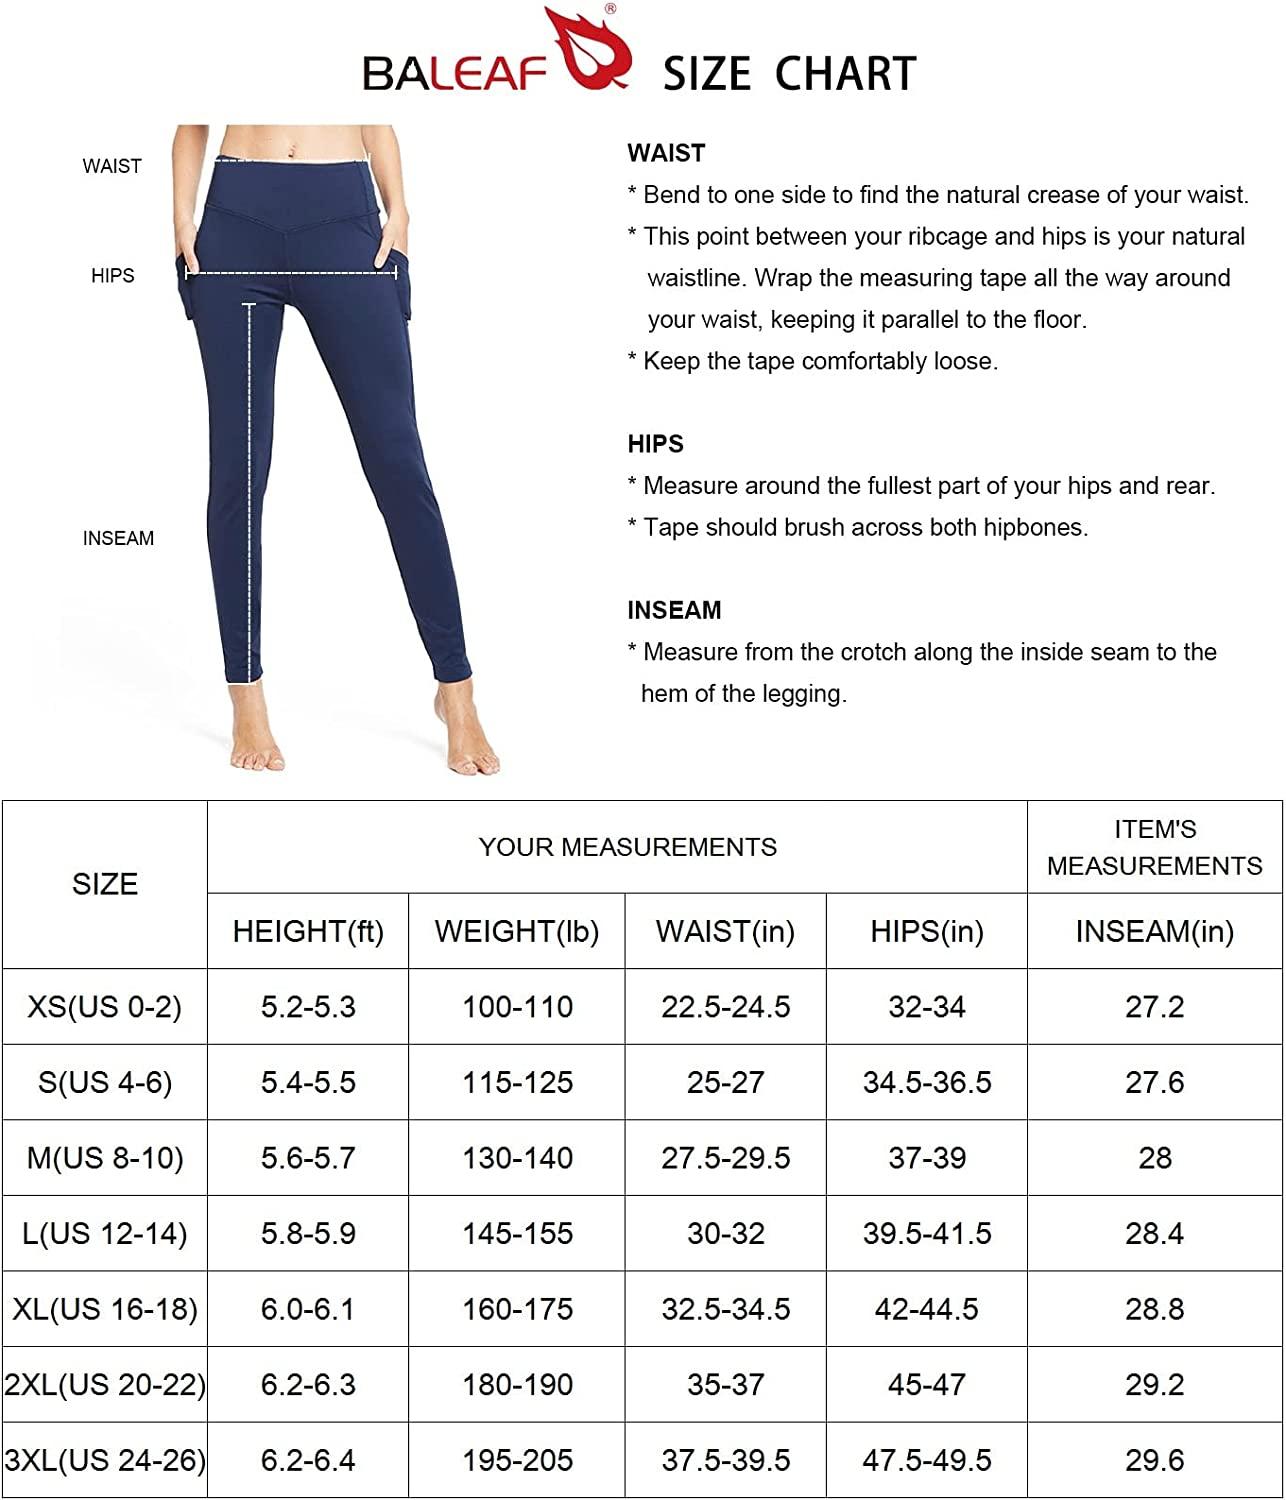  BALEAF Women's Fleece Lined Leggings Waterproof Winter Hiking  Pants Thermal Running Tights Zipper Pockets High Waisted Cold Weather Black  X-Small : BALEAF: Clothing, Shoes & Jewelry